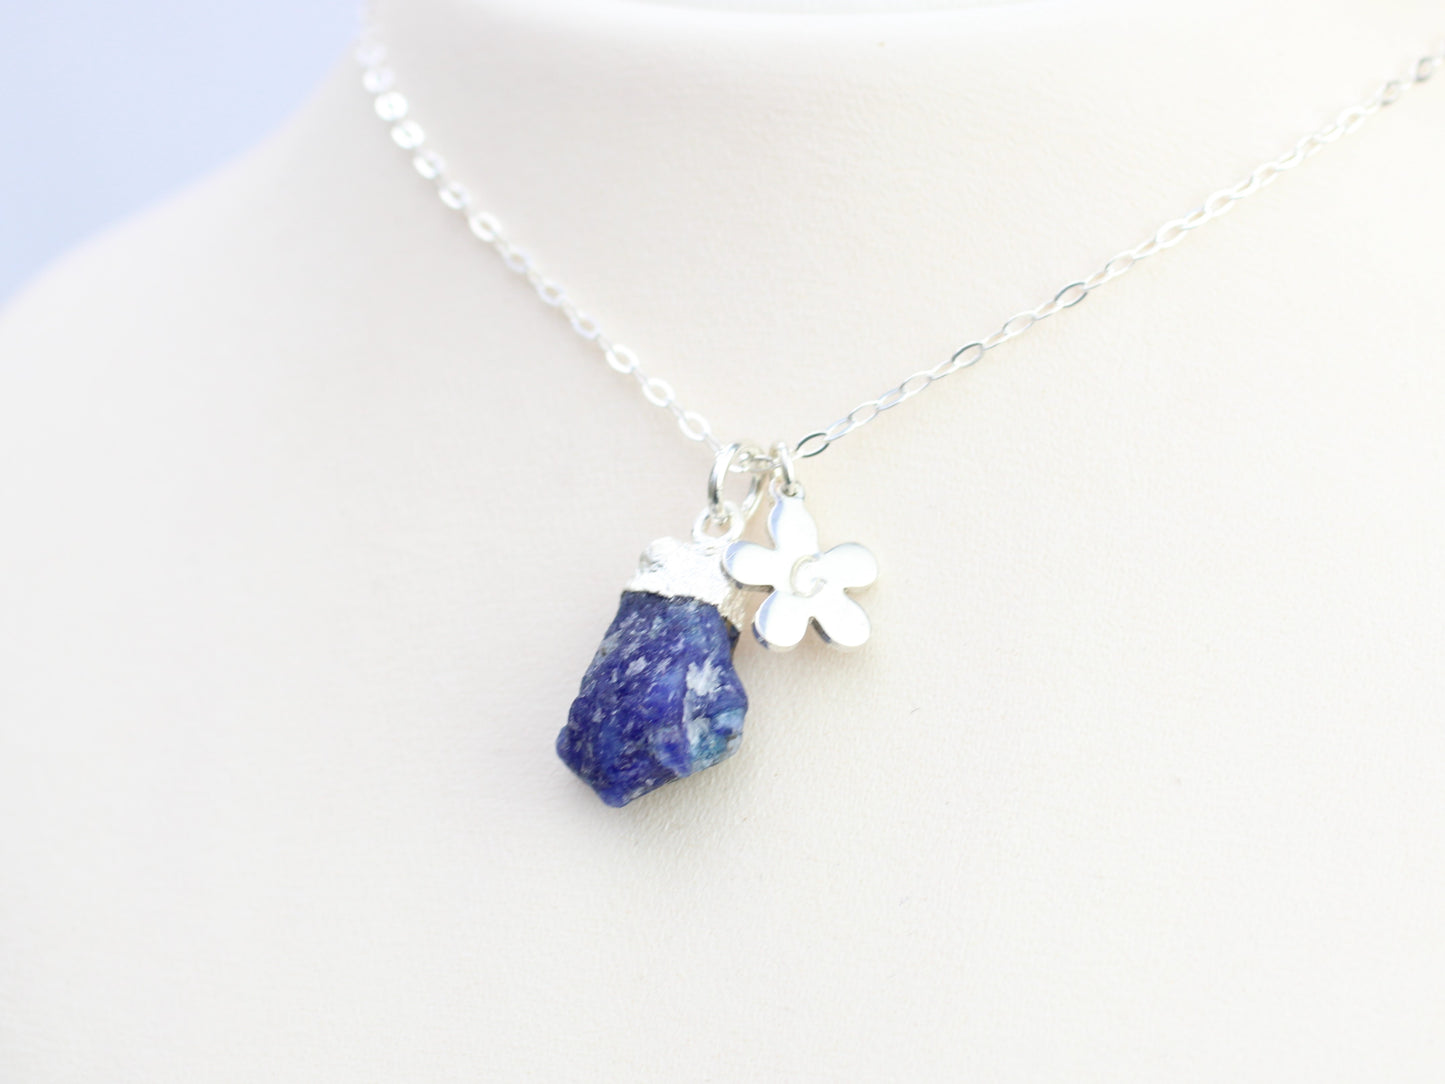 Personalised sapphire necklace in silver.